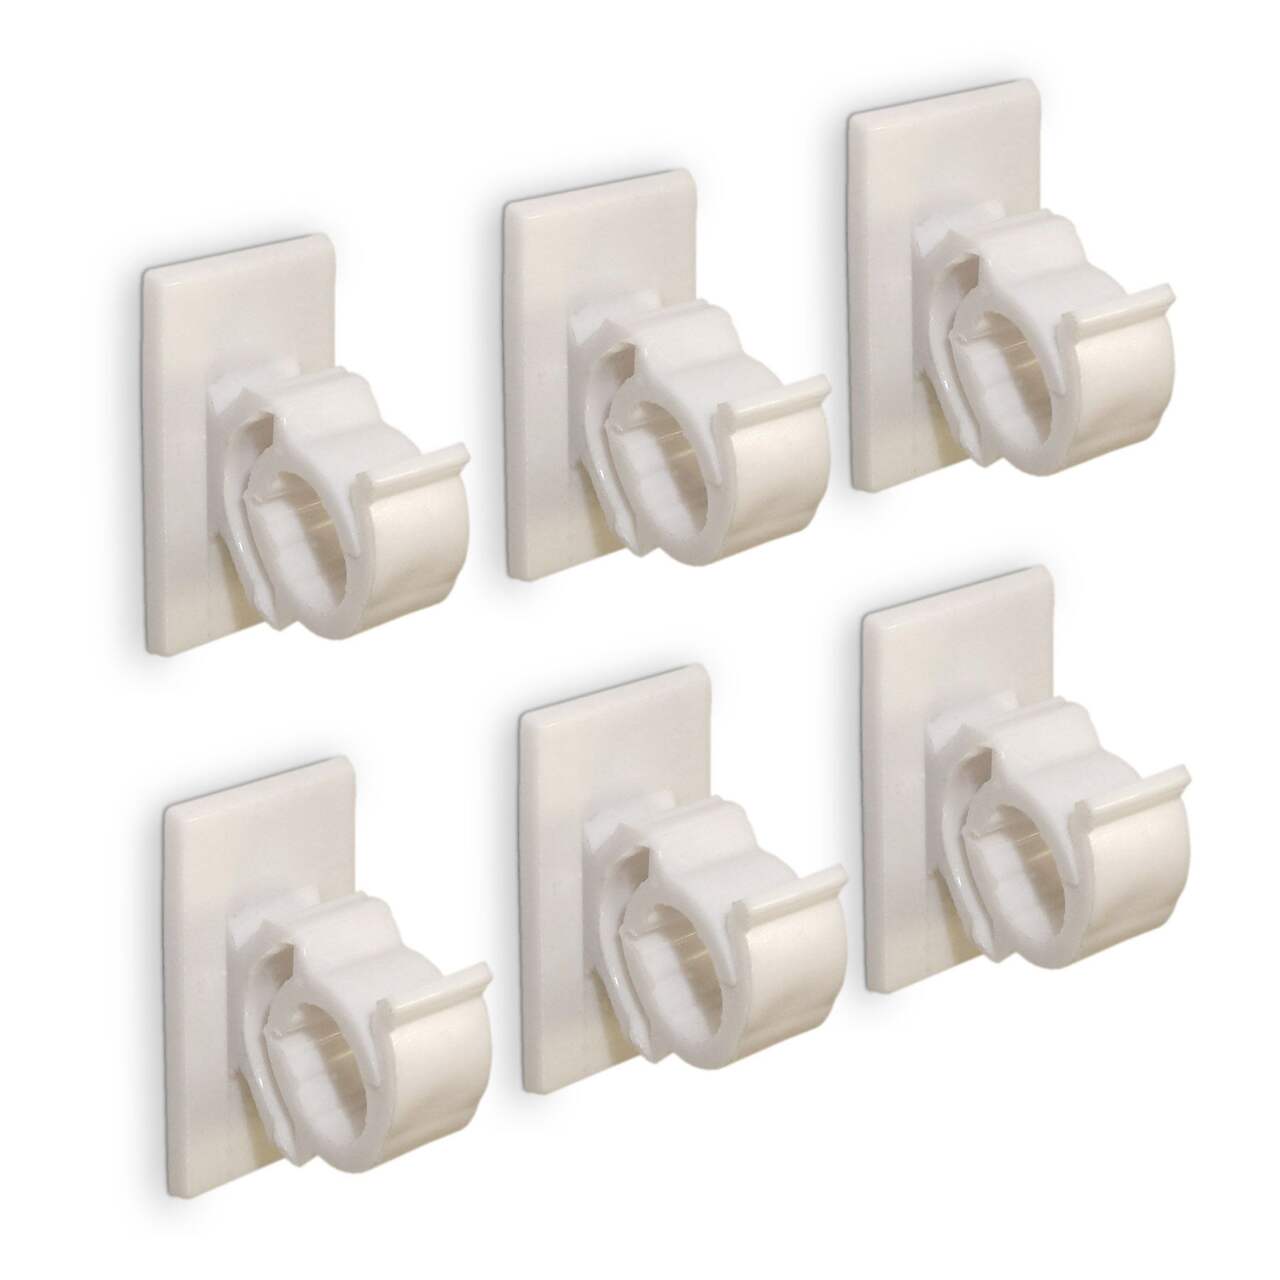 https://media-www.canadiantire.ca/product/fixing/hardware/general-hardware/0612133/super-klip-pack-white-3ca68225-9155-4ffa-a882-571f25de1cdf-jpgrendition.jpg?imdensity=1&imwidth=640&impolicy=mZoom